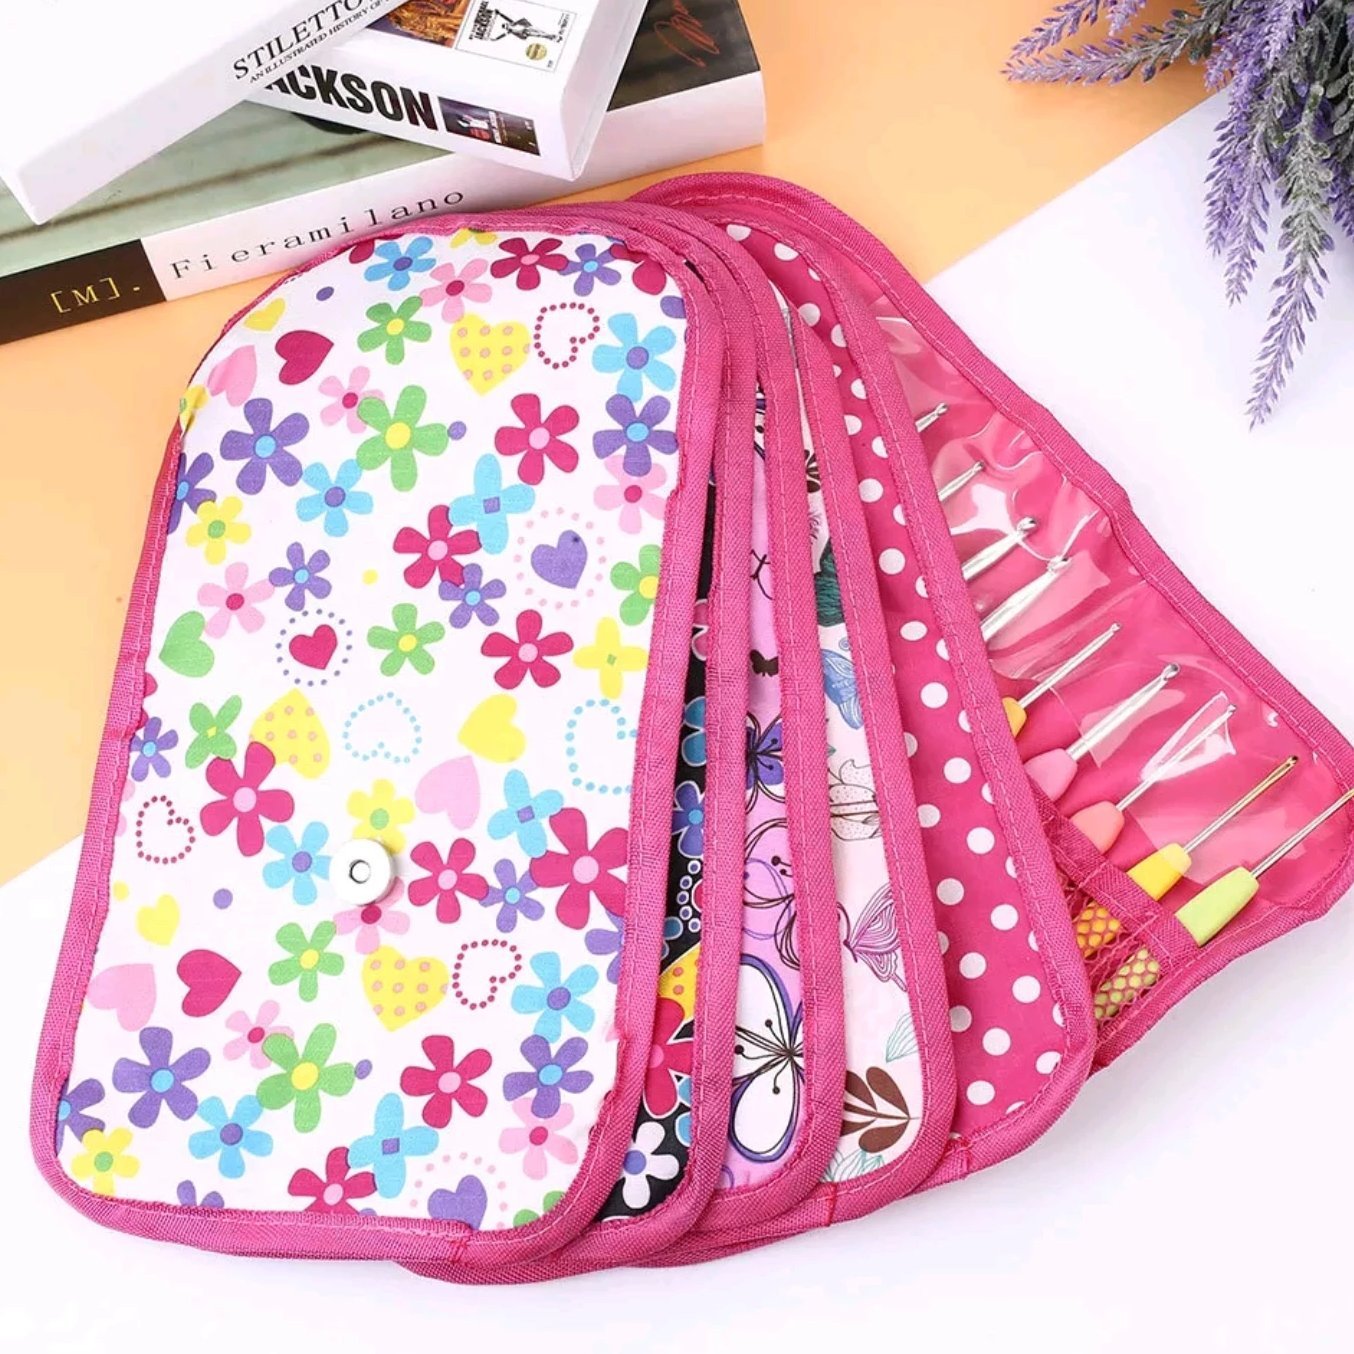 Crochet Hook Set And Storage Case AU Stock – Casz's Country Craft's